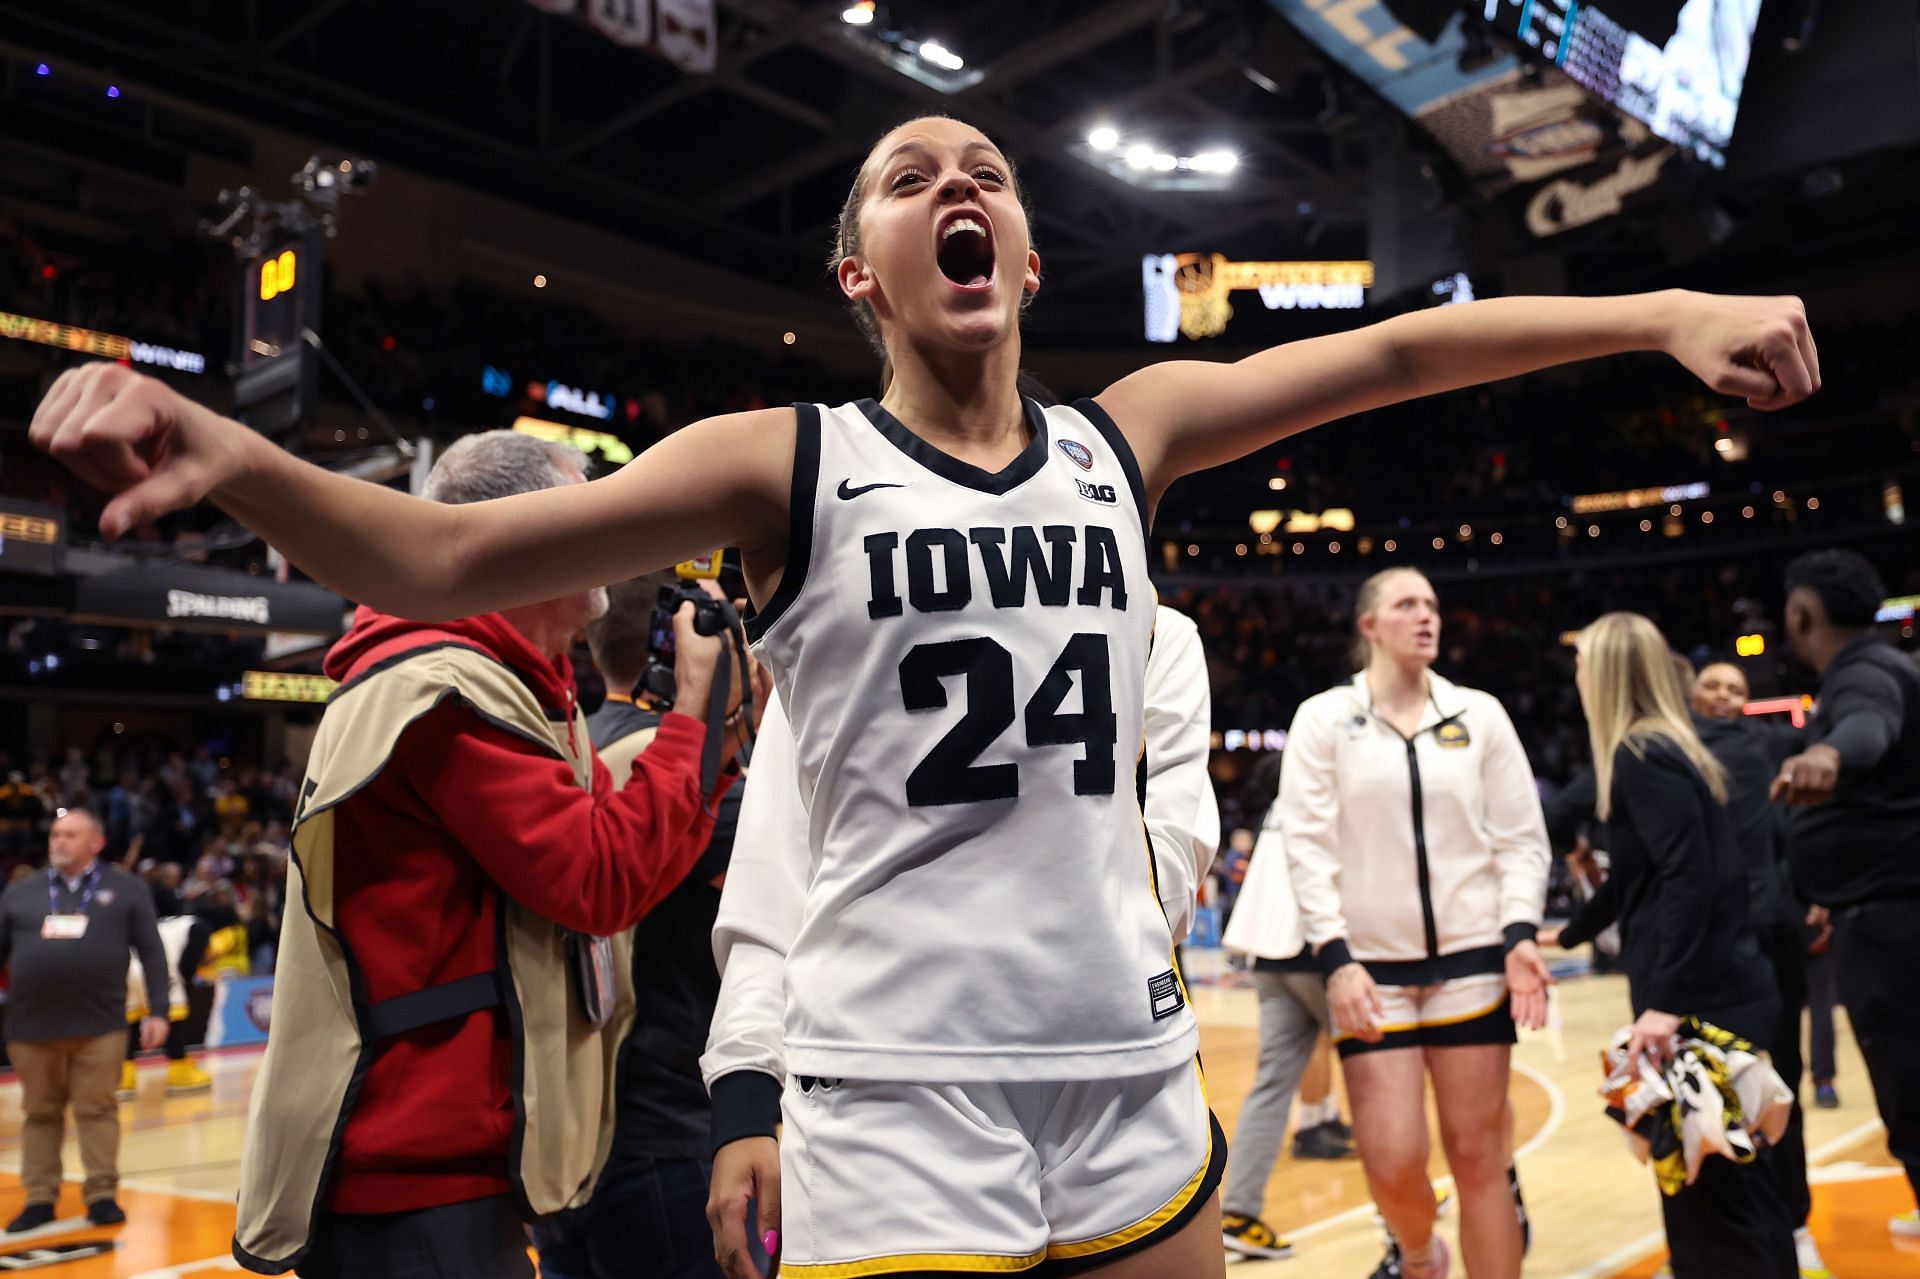 Iowa guard Gabbie Marshall celebrates after their win against UConn.